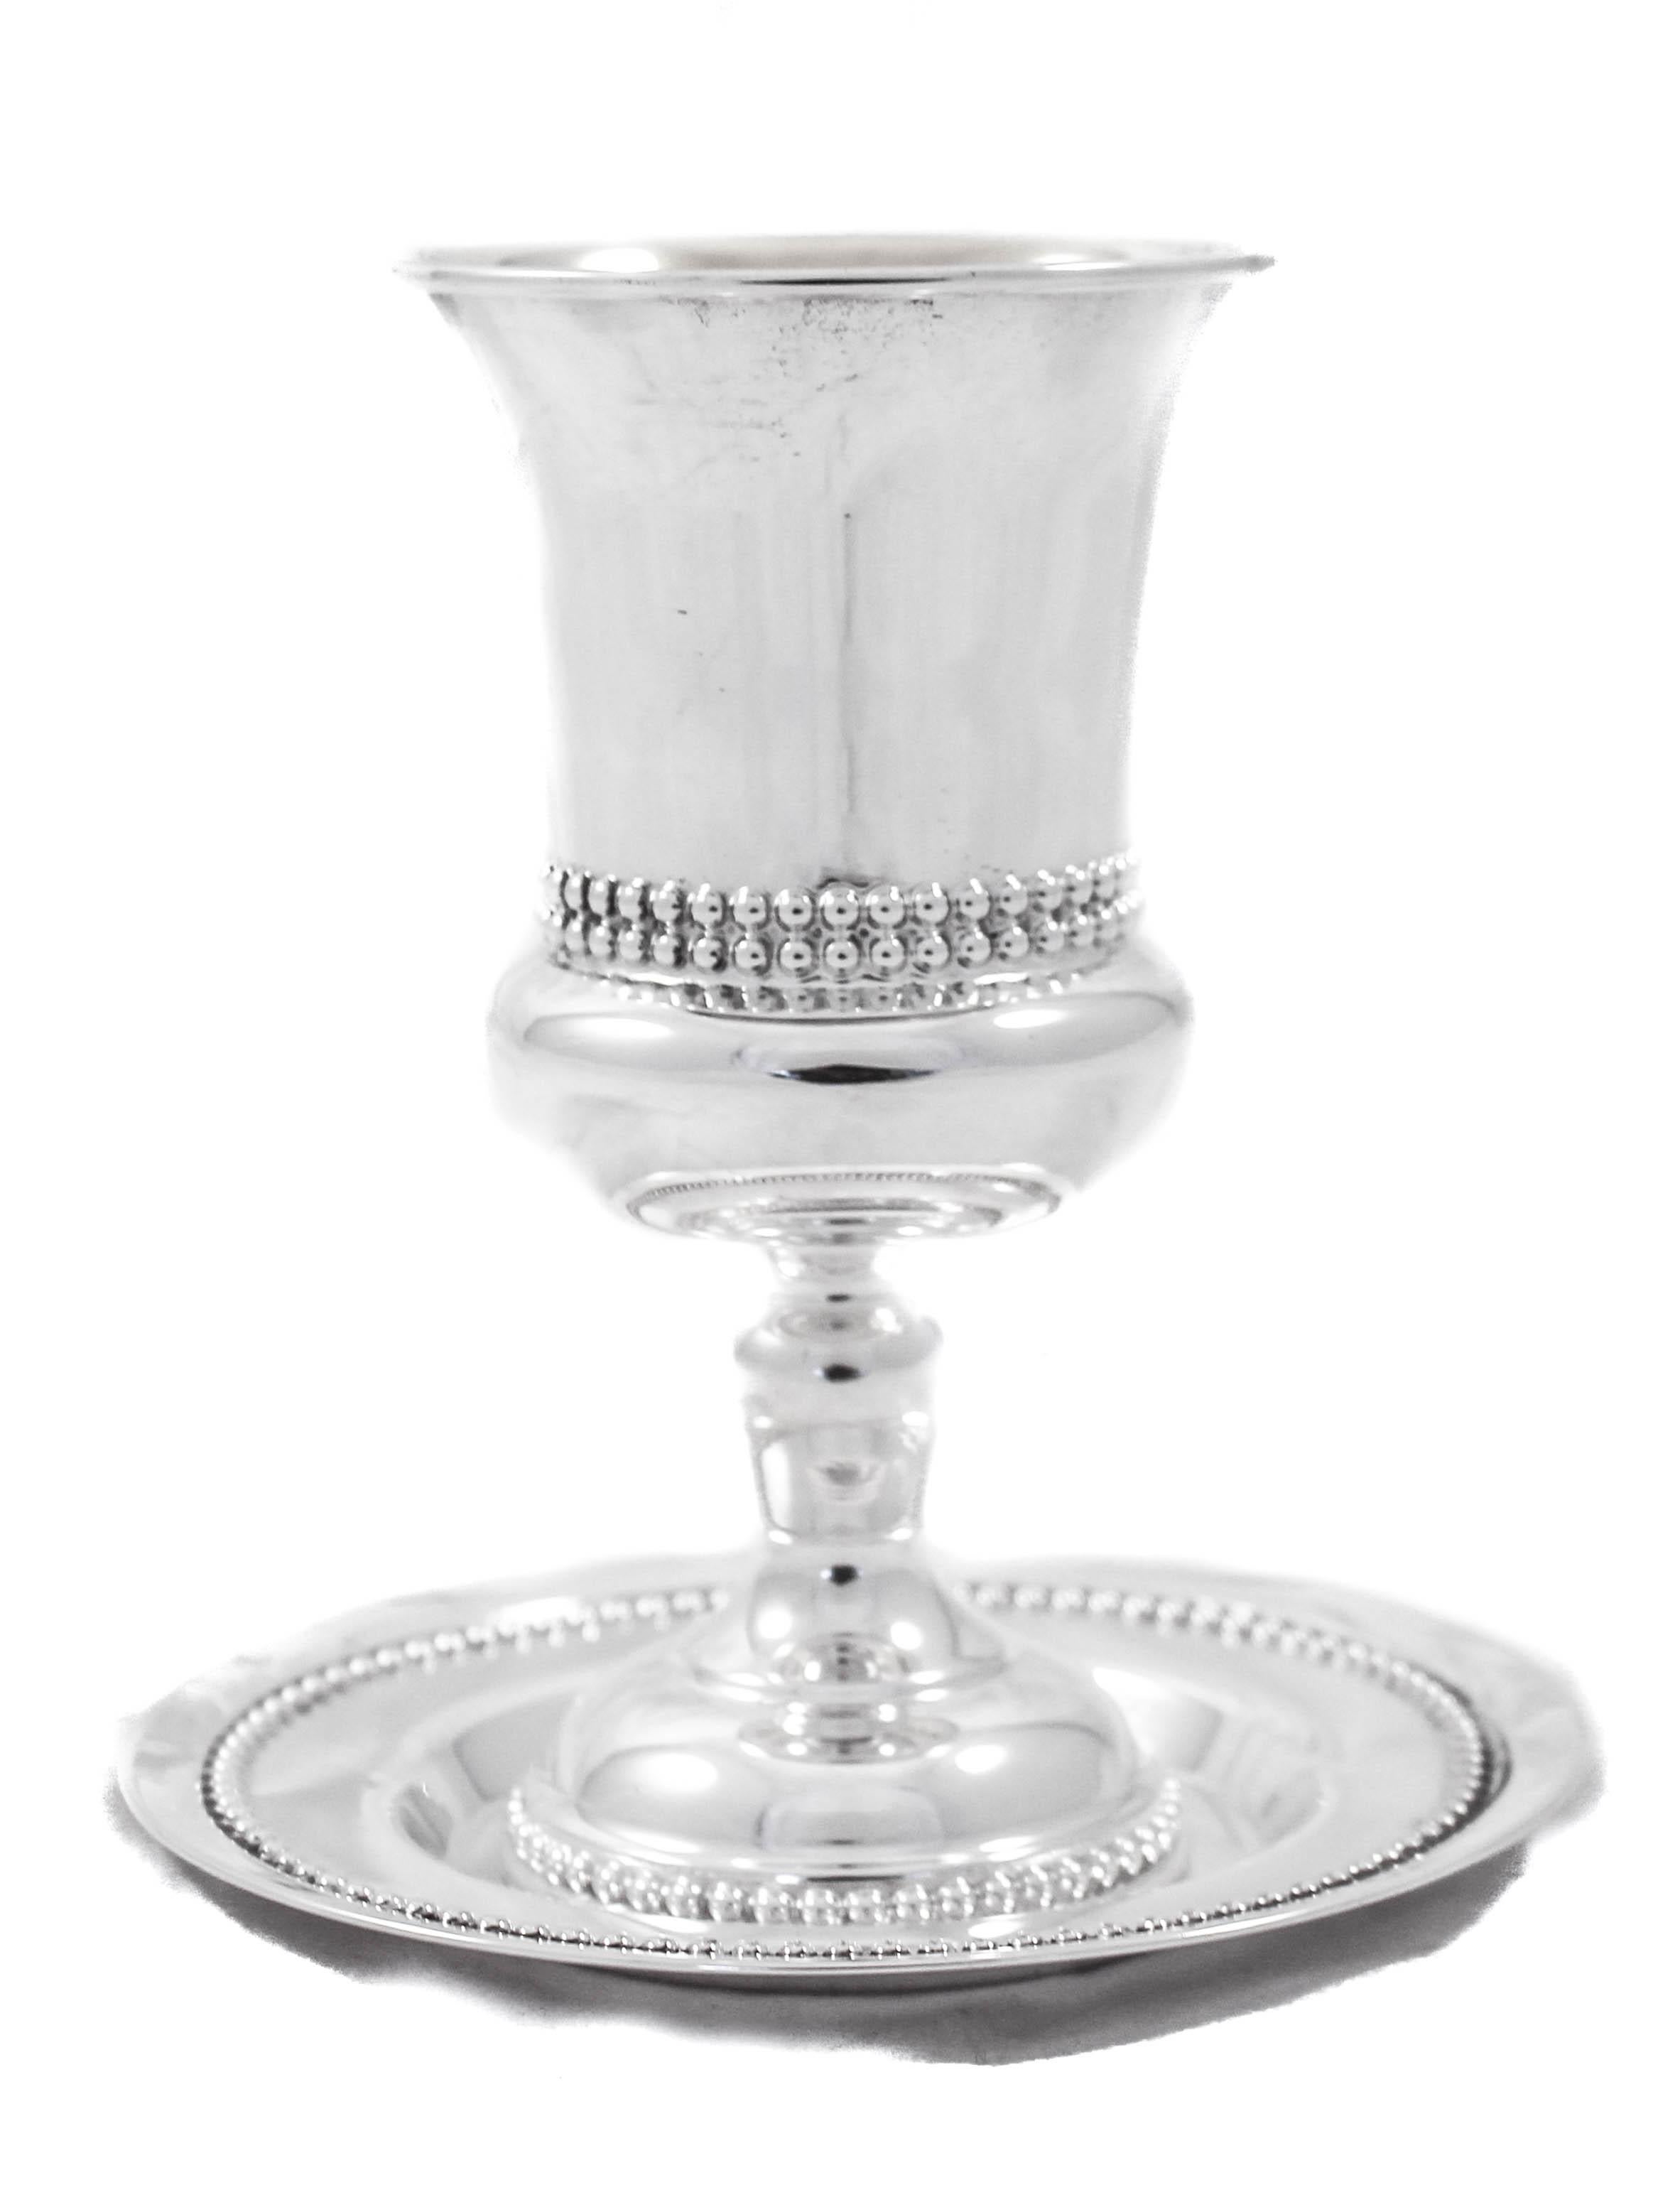 We are happy to offer this sterling silver Kiddush goblet and matching plate, made in Israel. The goblet has a Classic shape with beading around the center and base while the plate has beading along the edge. A lovely wedding or even a bar mitzvah